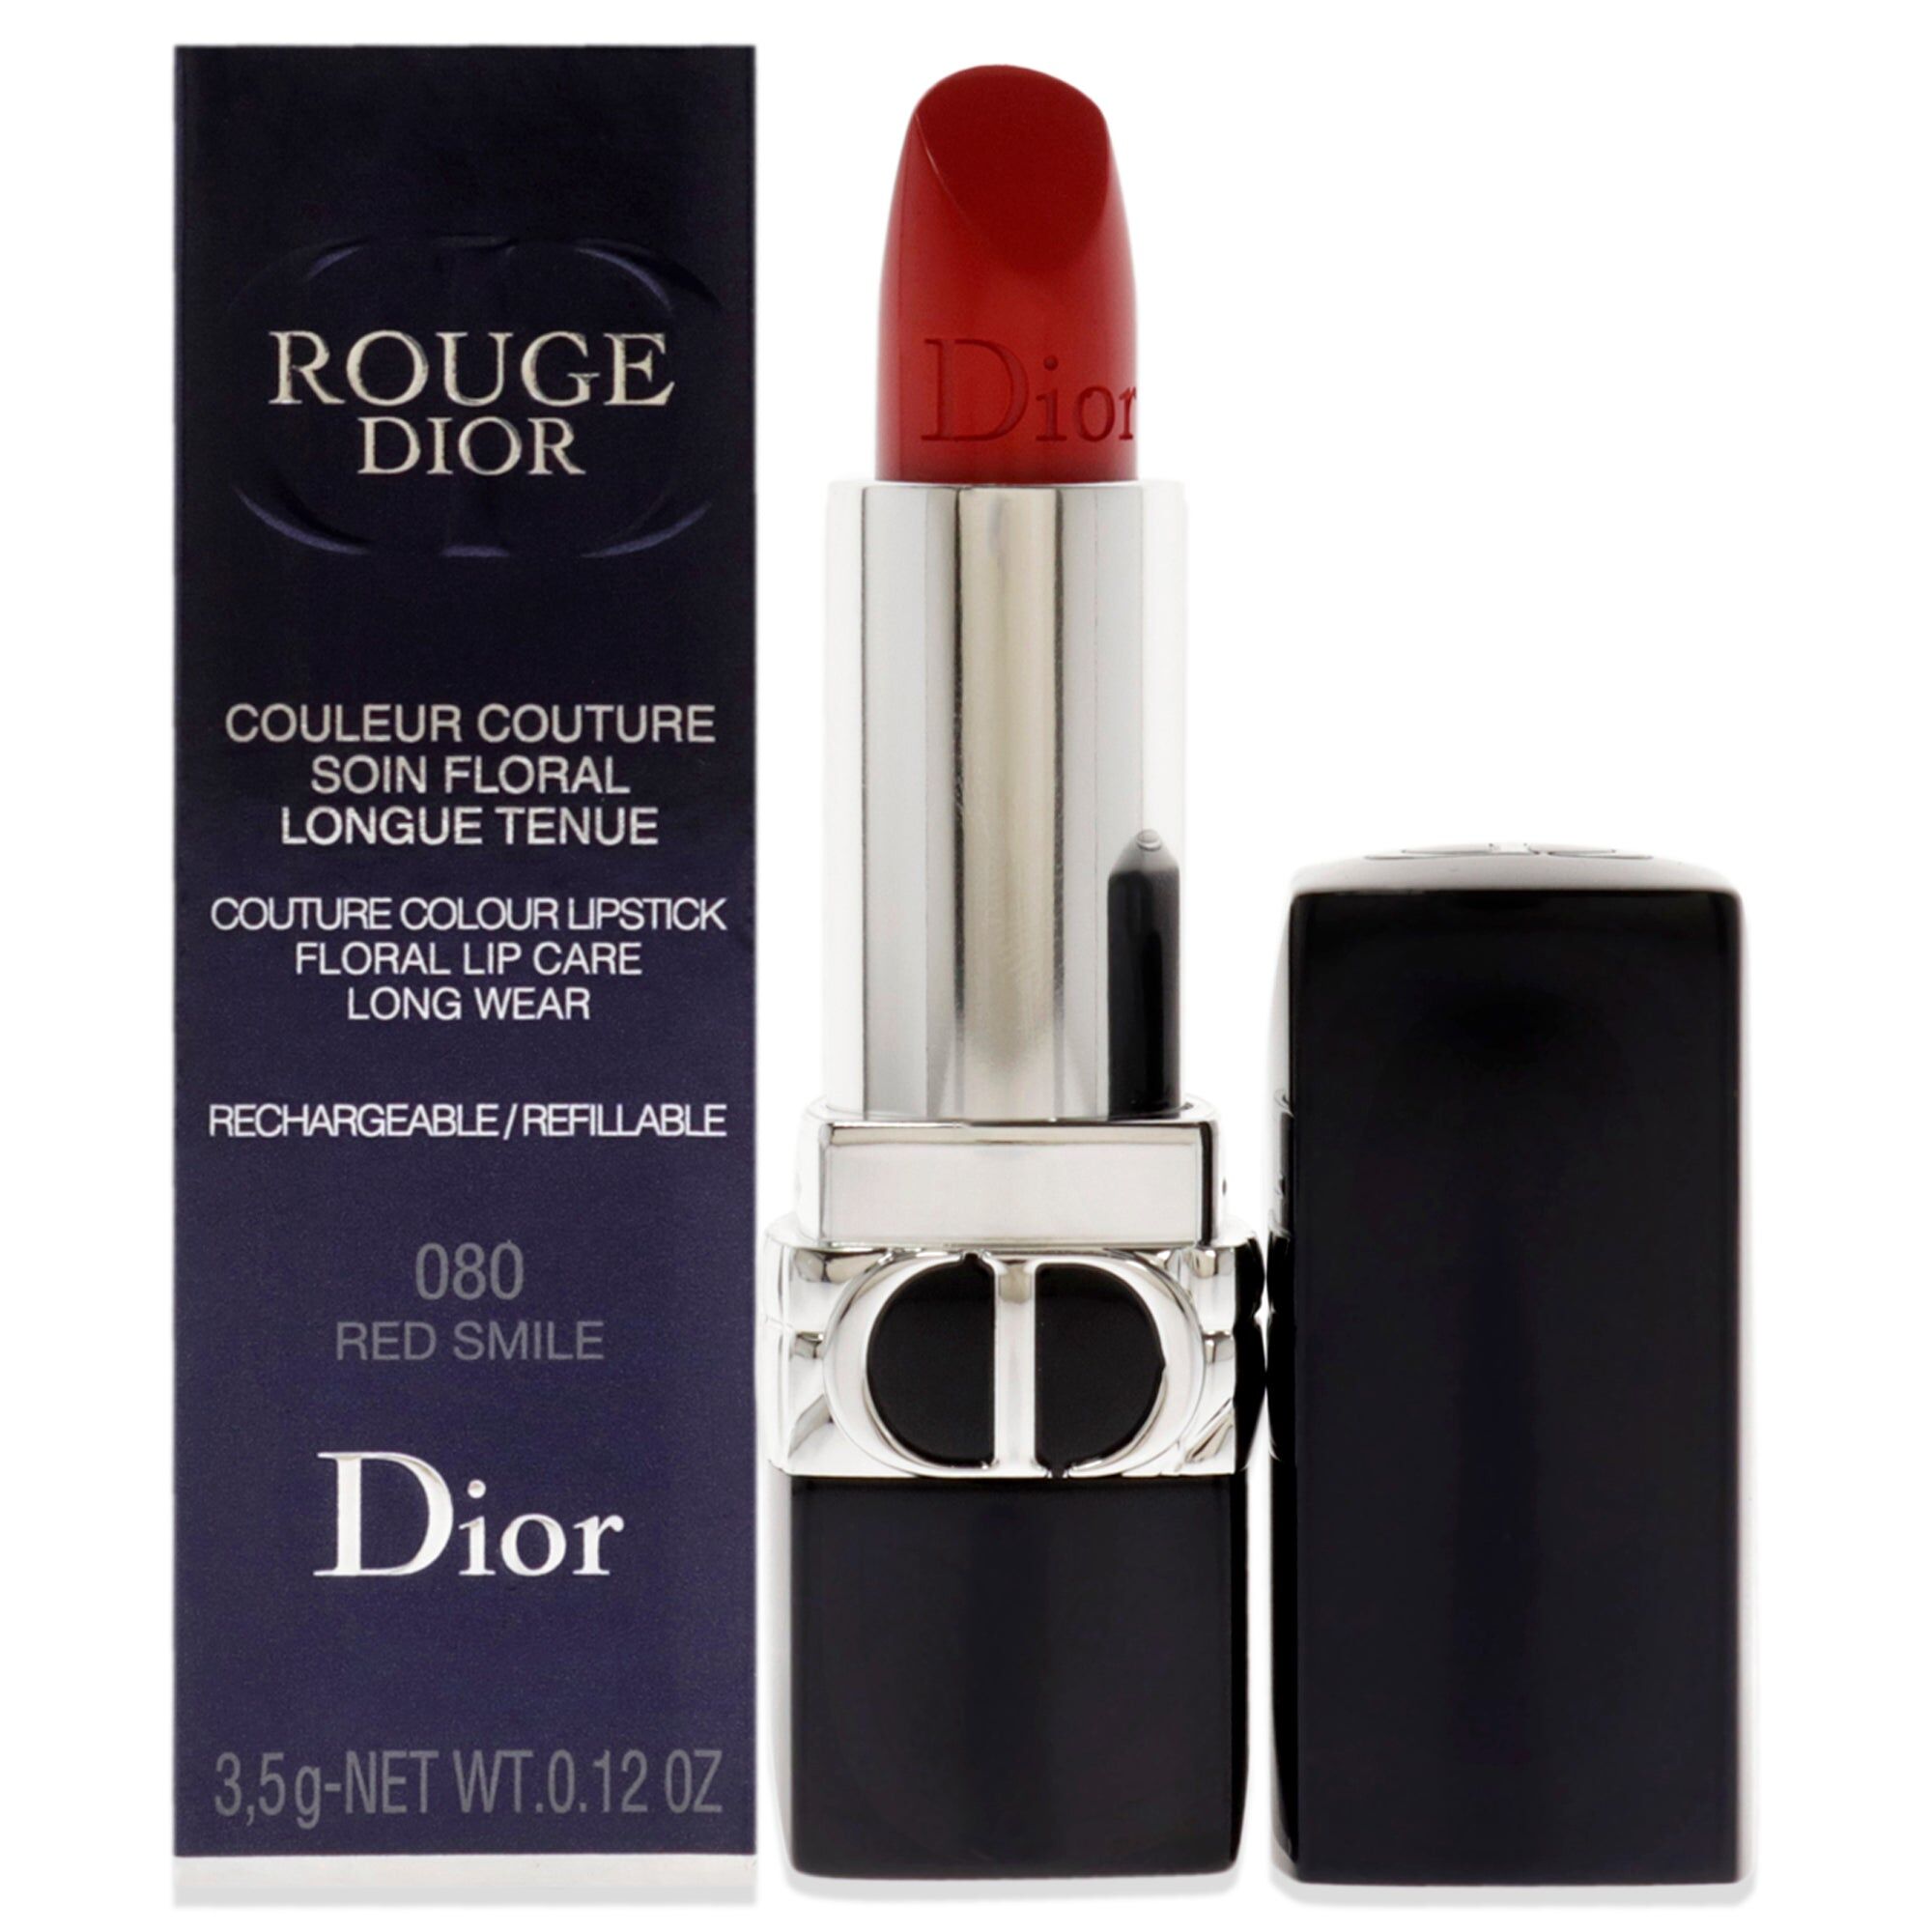 Rouge Dior Couture Lipstick Satin - 080 Red Smile by Christian Dior for Women - 0.12 oz Lipstick (Refillable) Small